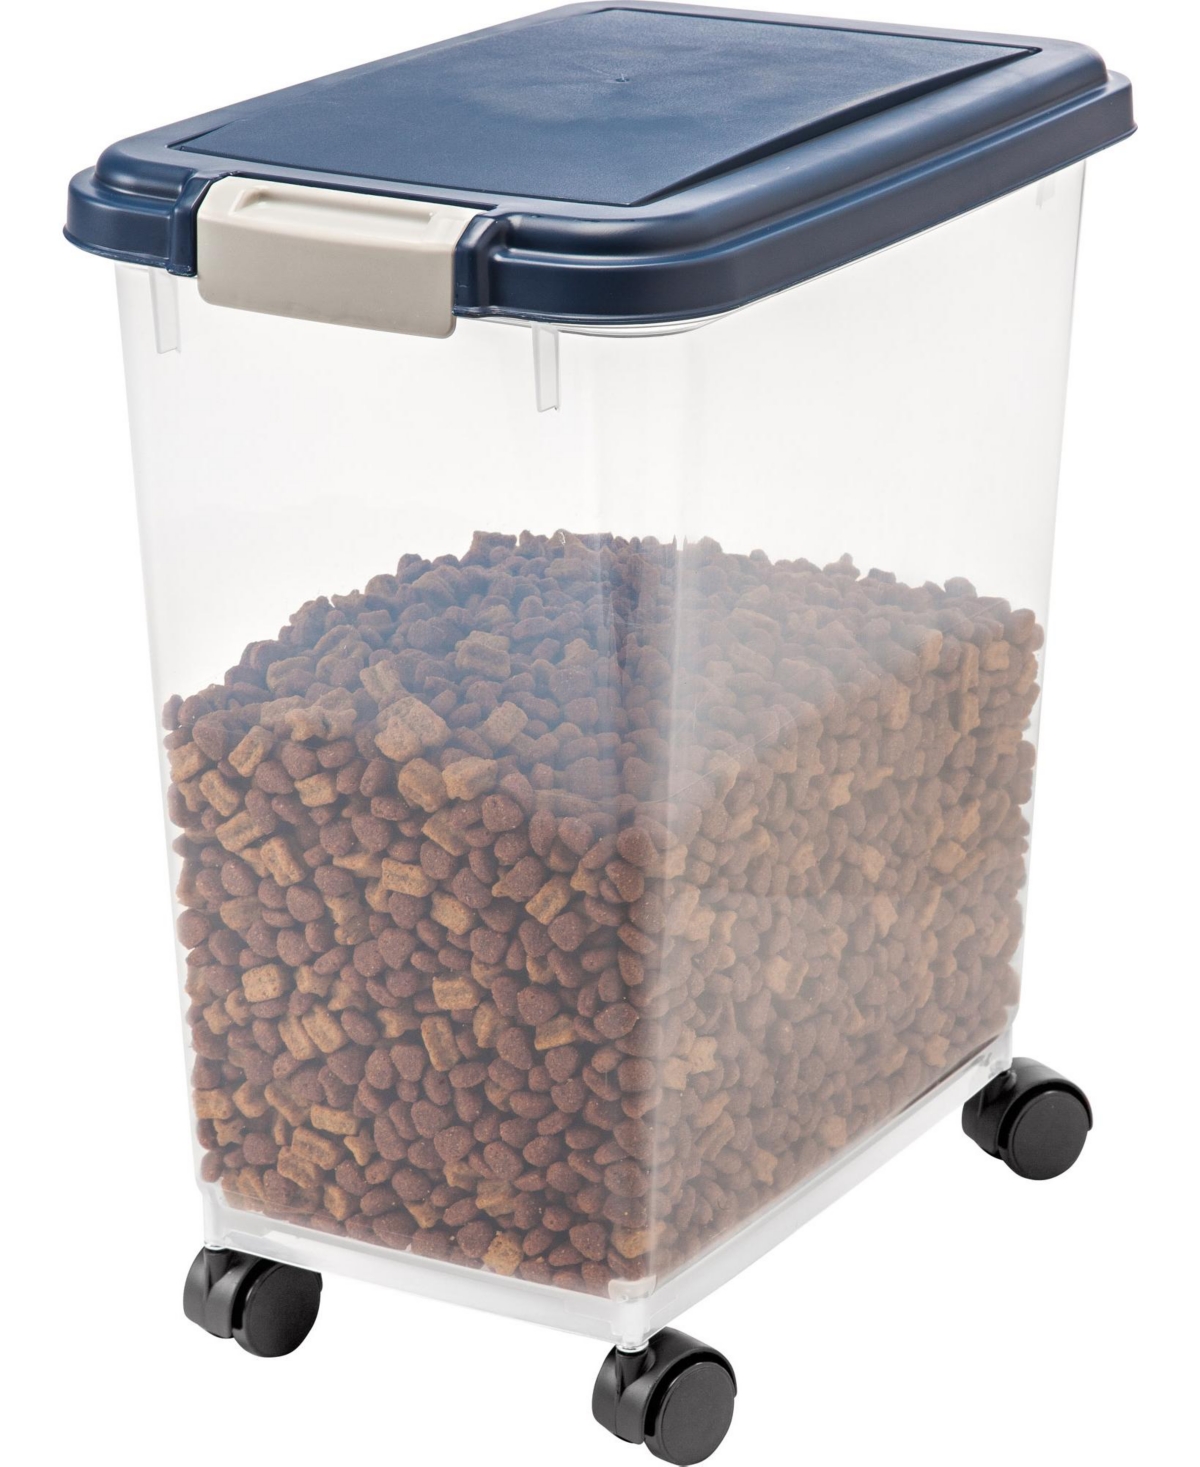 30 Lbs / 33 Qt WeatherPro Airtight Pet Food Storage Container with Attachable Casters, For Dog Cat Bird and Other Pet Food Storage Bin, Keep